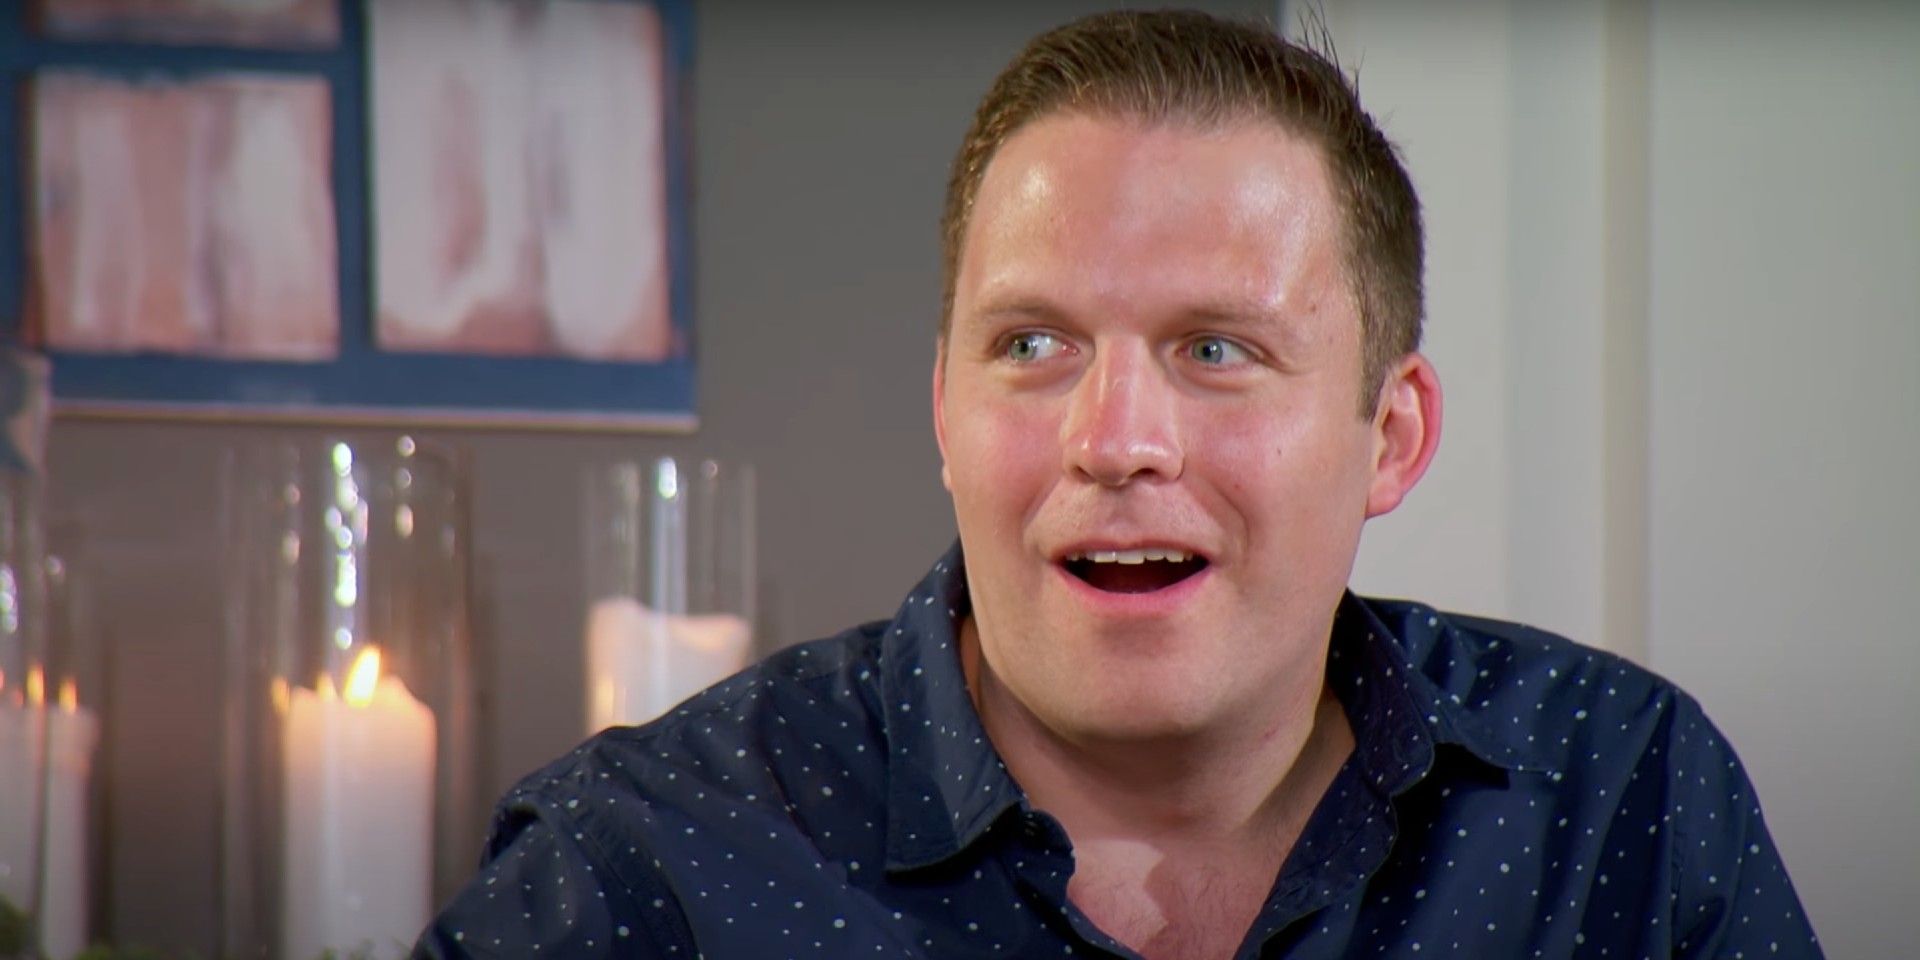 David Norton Married At First Sight mouth open posing with candles in background